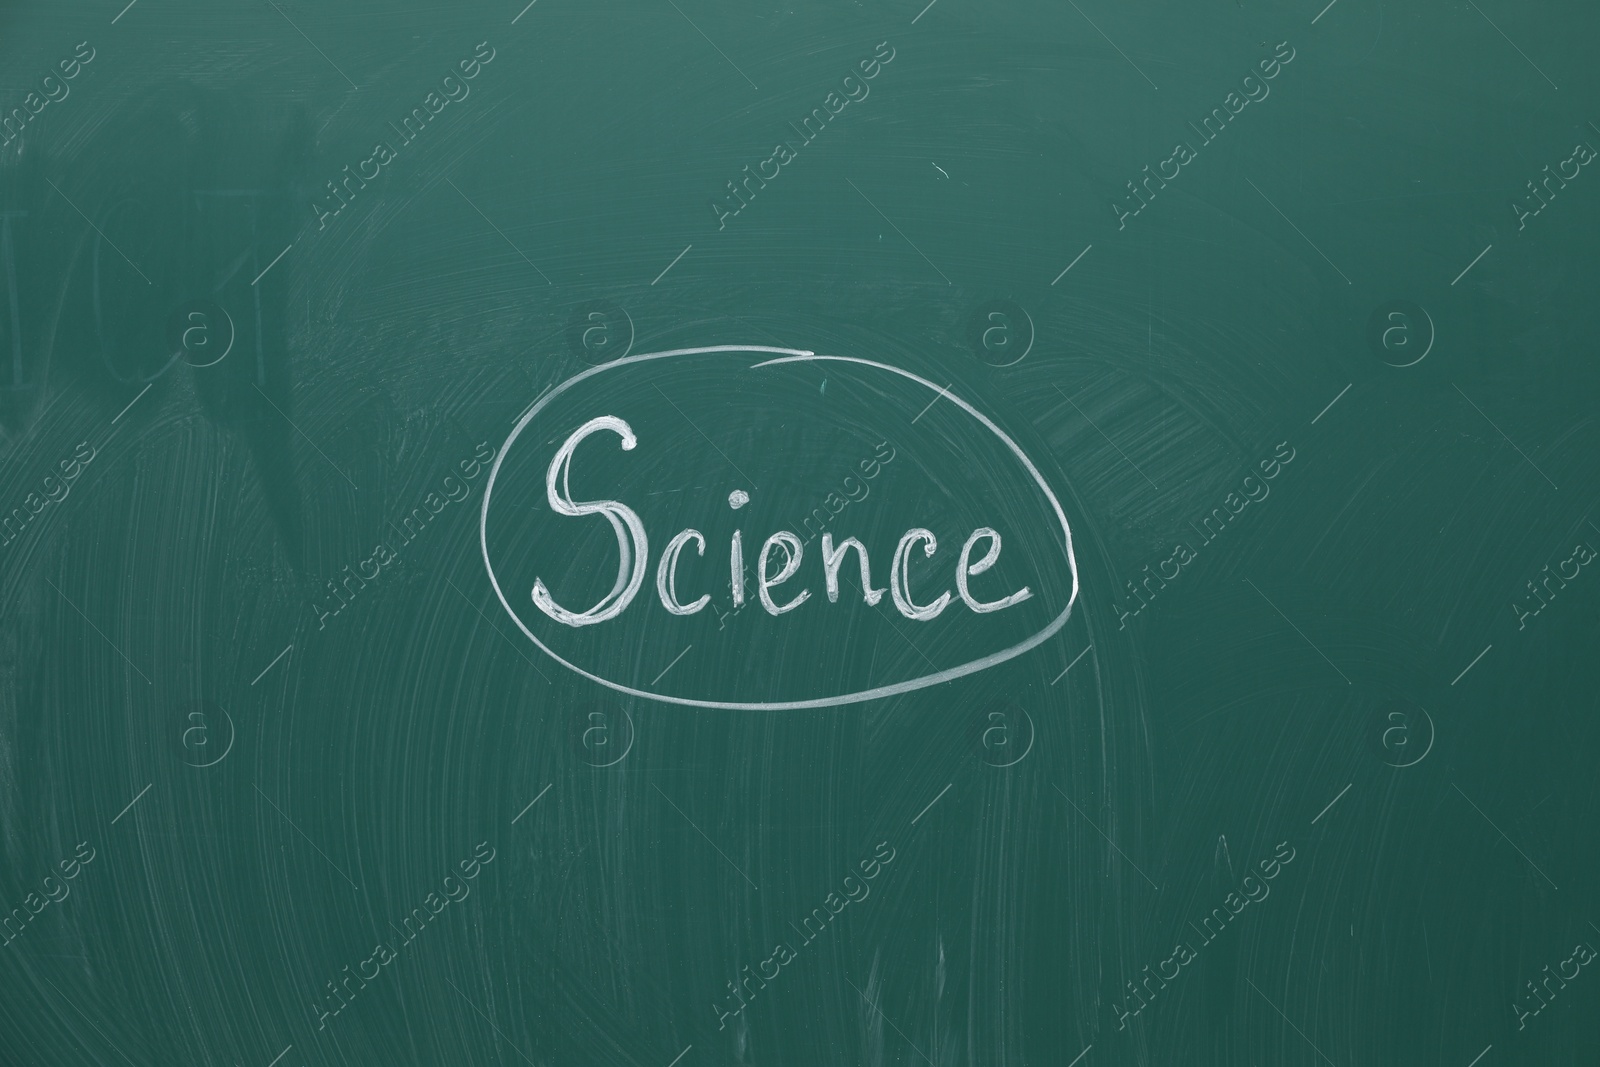 Photo of Word Science written with chalk on green board